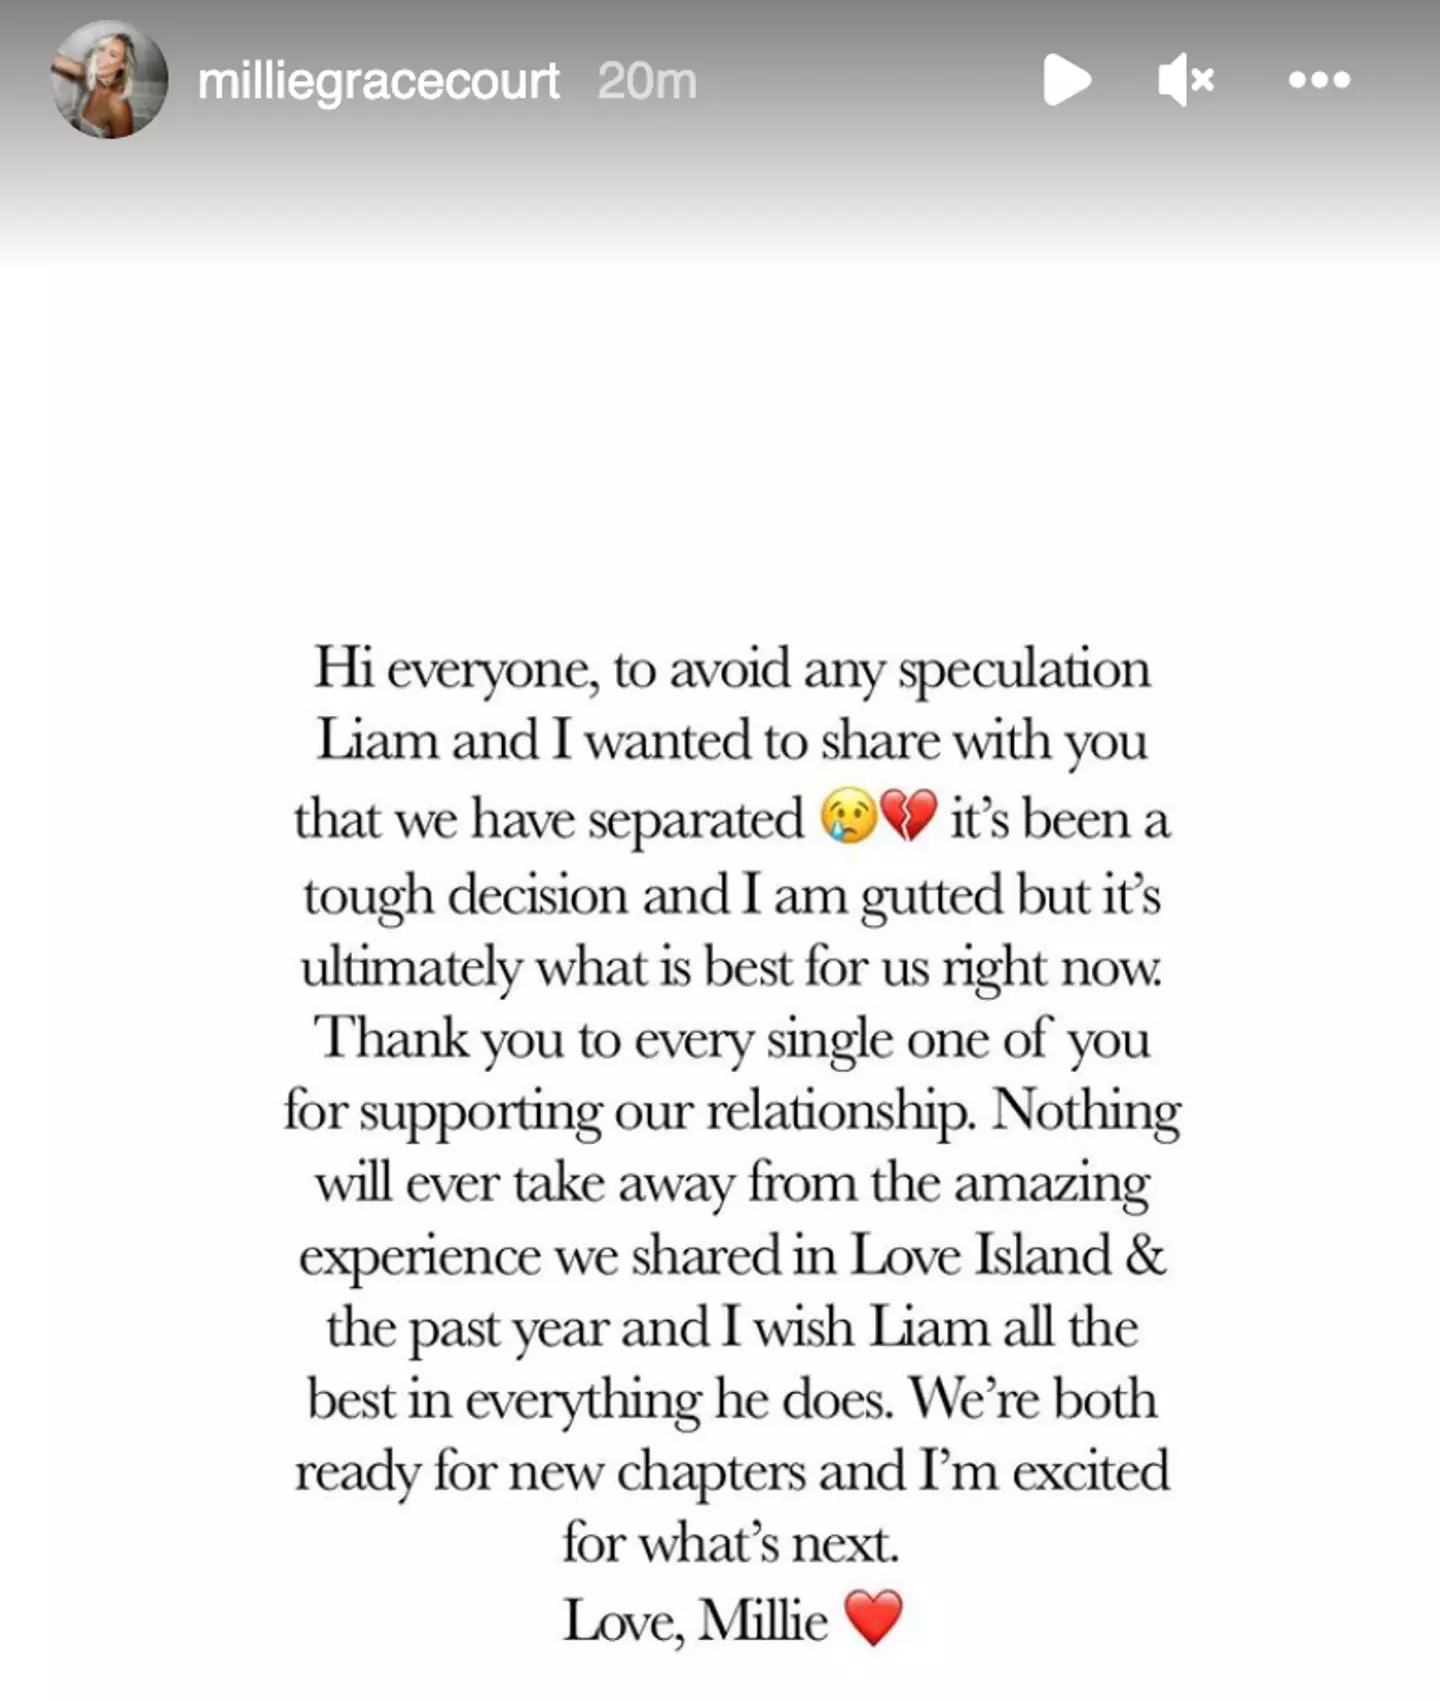 Millie released a statement on Instagram.